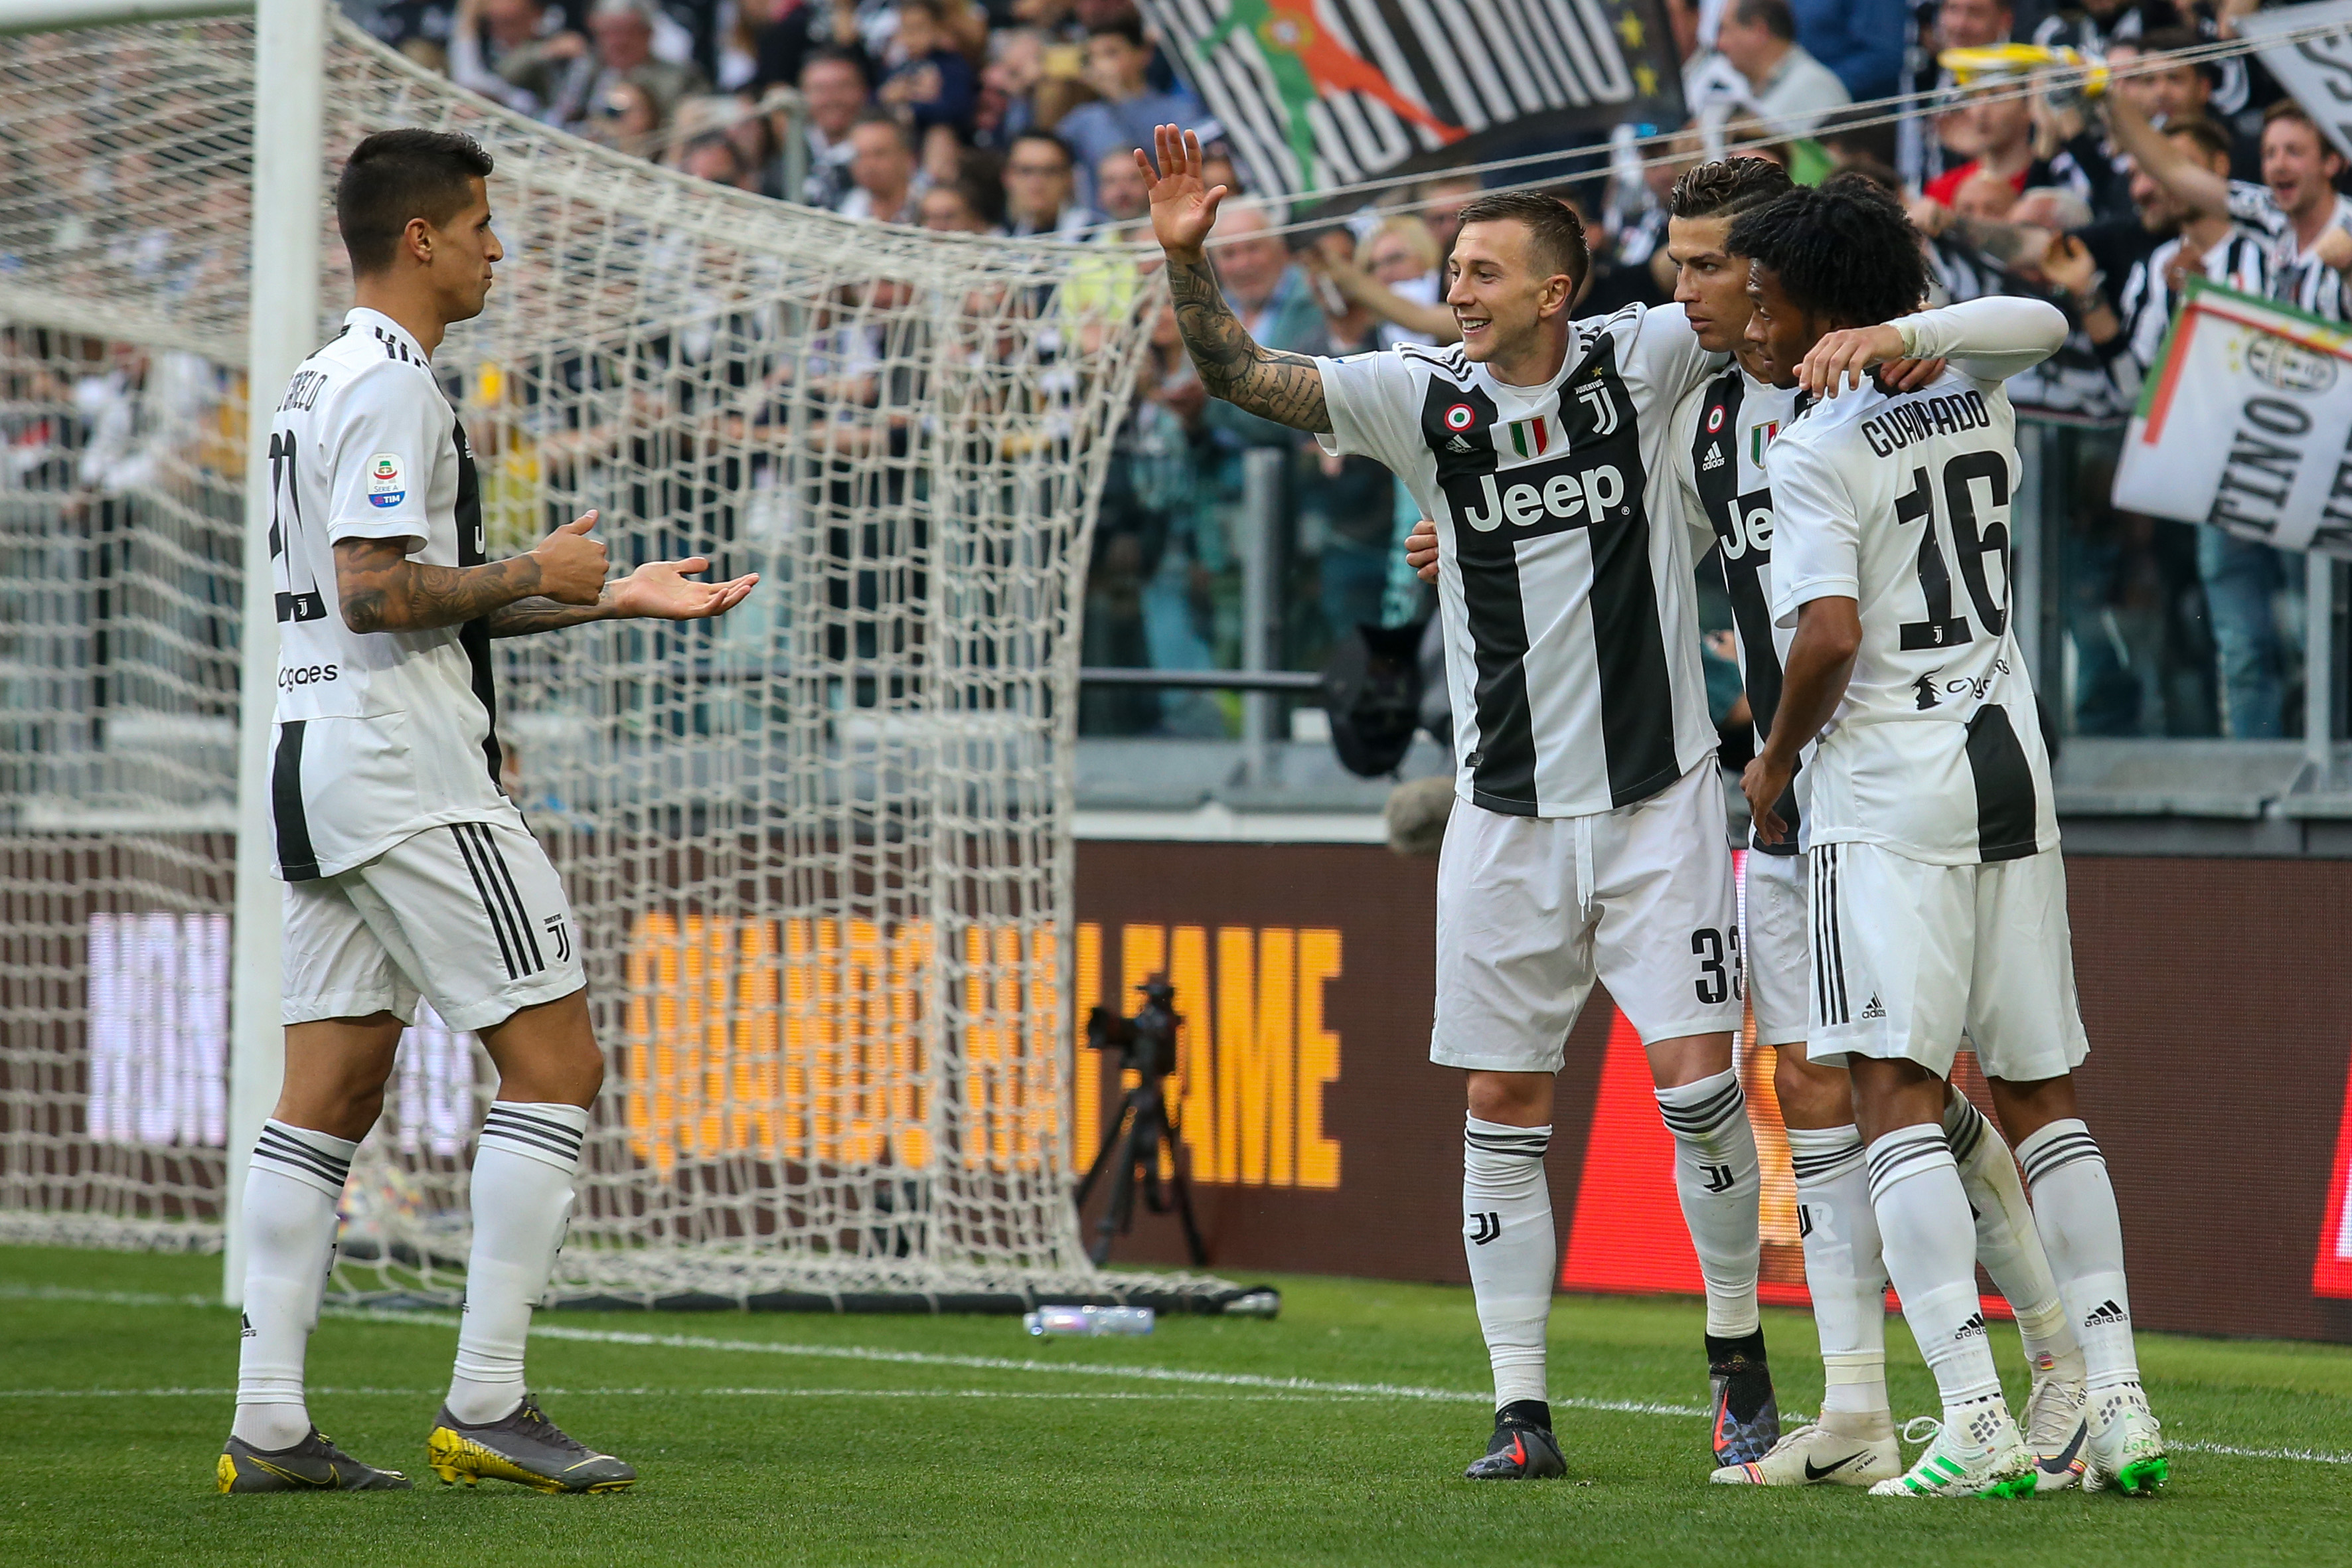 TURIN, ITALY - APRIL 20: Cristiano Ronaldo of Juventus celebrates with his teammates after German Pezzella of ACF Fiorentina (not in frame) scored an own goal during the Serie A match between Juventus and ACF Fiorentina on April 20, 2019 in Turin, Italy. (Photo by Giampiero Sposito/Getty Images)